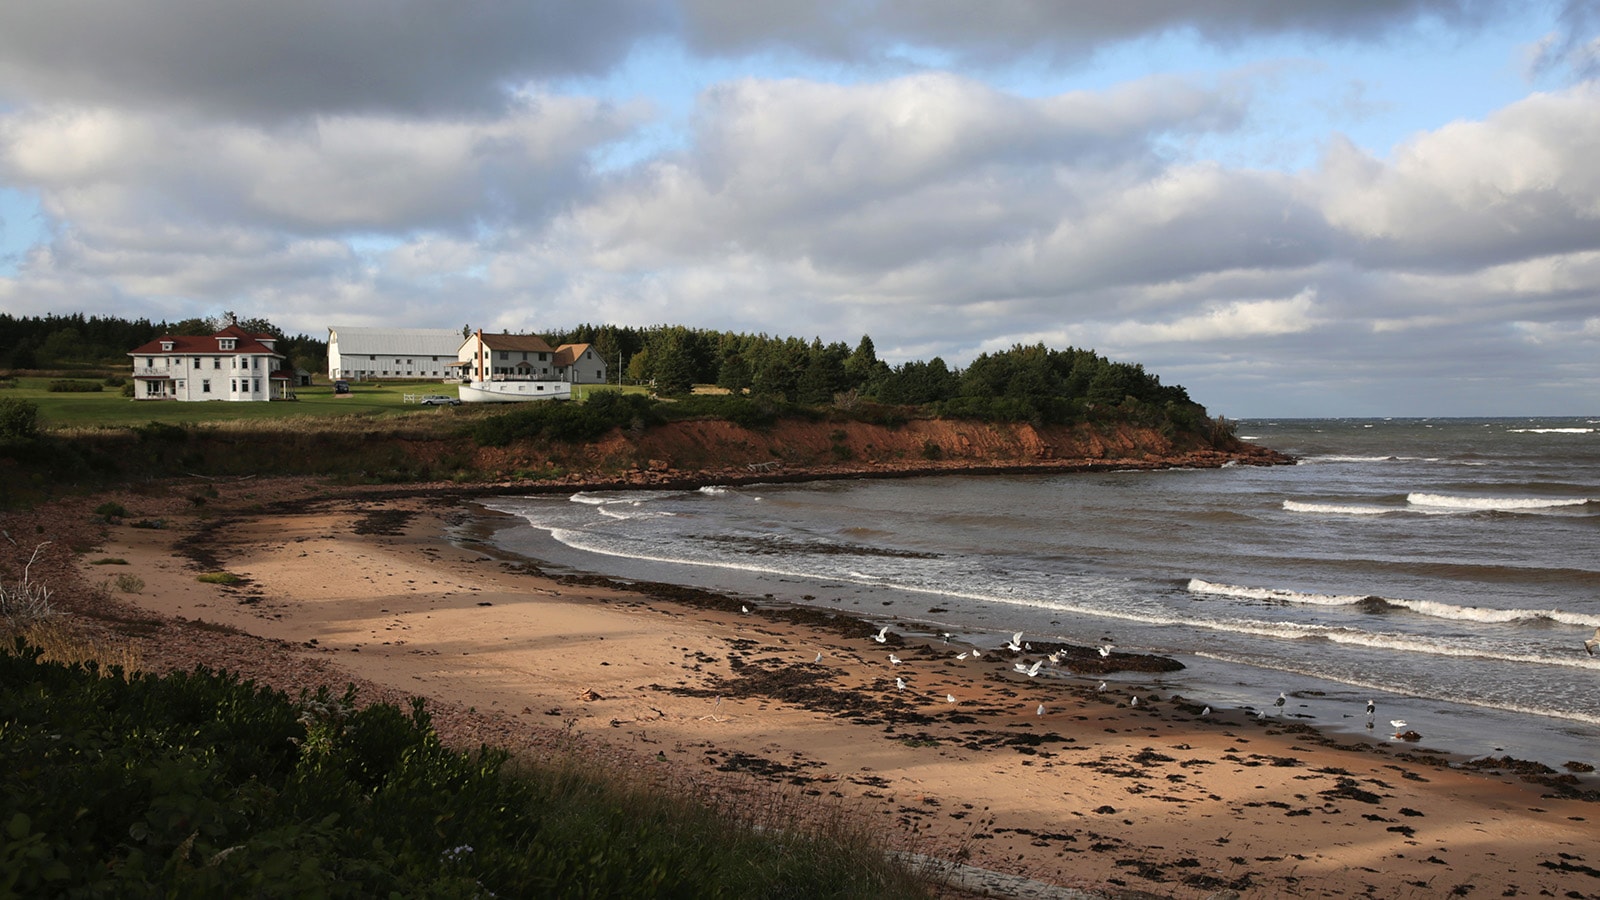 The scenic drive from North Rustico to Cavendish skirts along the peaceful coast.